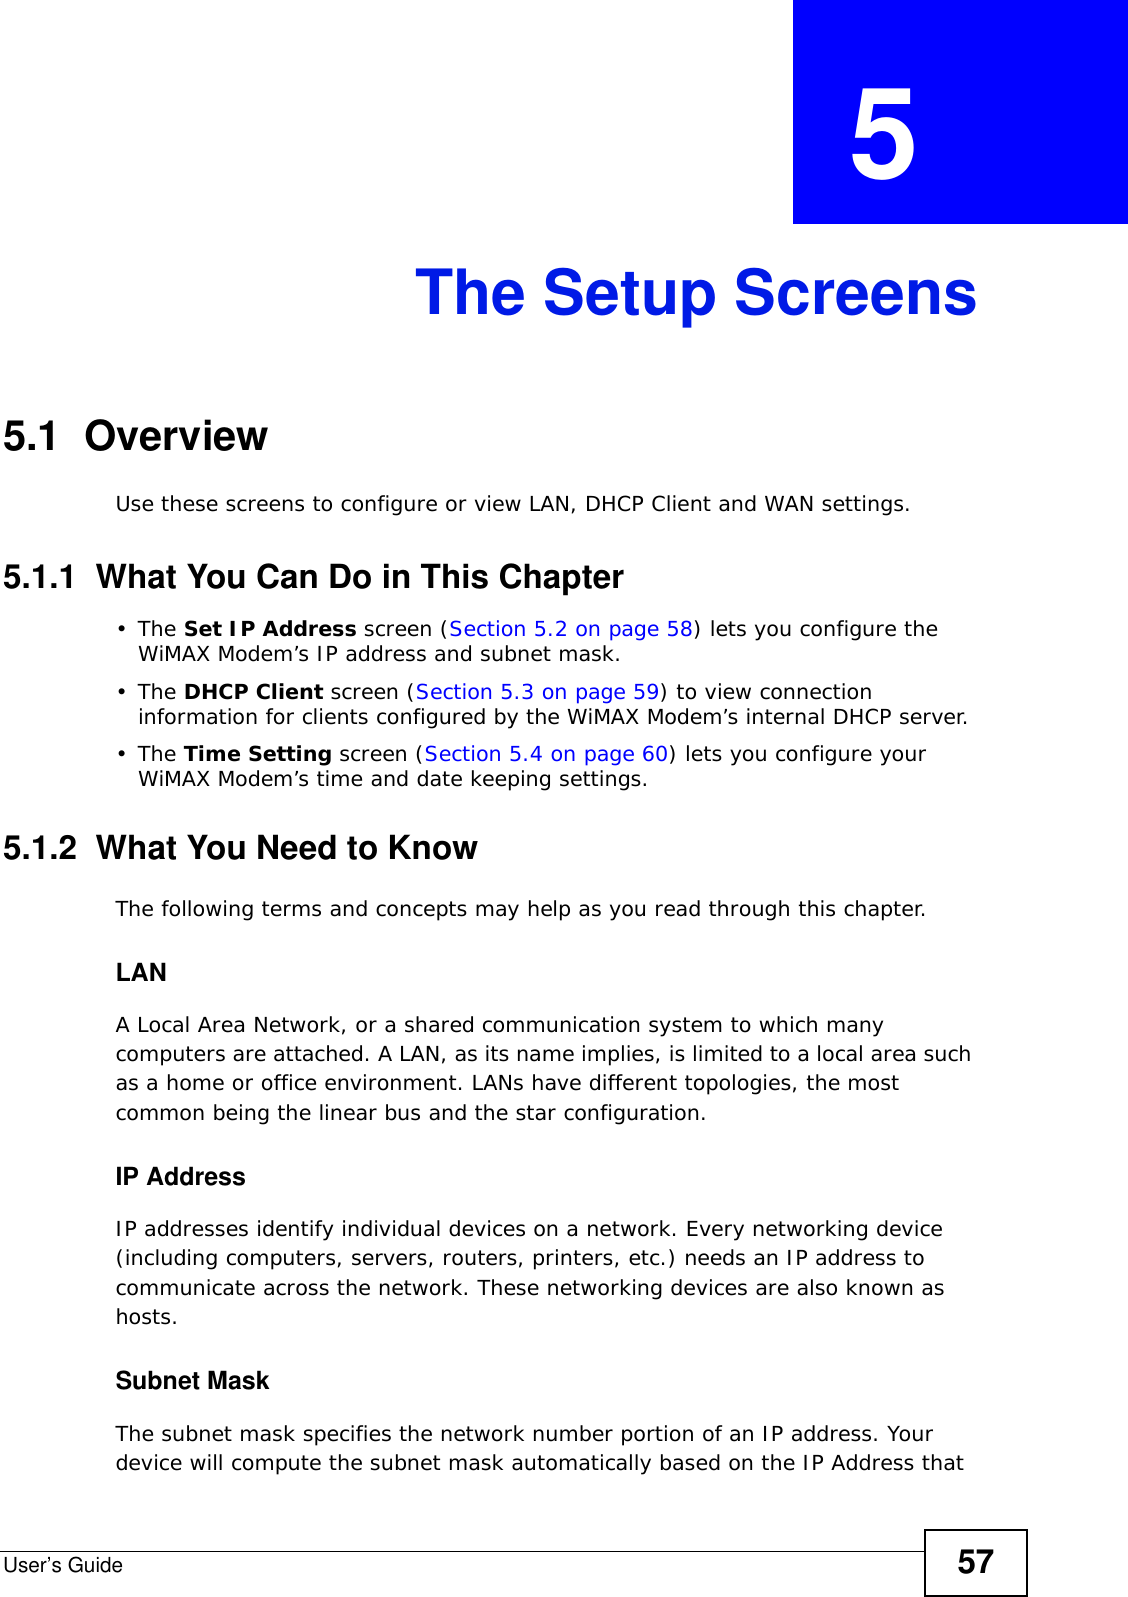 User’s Guide 57CHAPTER  5 The Setup Screens5.1  OverviewUse these screens to configure or view LAN, DHCP Client and WAN settings.5.1.1  What You Can Do in This Chapter•The Set IP Address screen (Section 5.2 on page 58) lets you configure the WiMAX Modem’s IP address and subnet mask.•The DHCP Client screen (Section 5.3 on page 59) to view connection information for clients configured by the WiMAX Modem’s internal DHCP server.•The Time Setting screen (Section 5.4 on page 60) lets you configure your WiMAX Modem’s time and date keeping settings.5.1.2  What You Need to KnowThe following terms and concepts may help as you read through this chapter.LANA Local Area Network, or a shared communication system to which many computers are attached. A LAN, as its name implies, is limited to a local area such as a home or office environment. LANs have different topologies, the most common being the linear bus and the star configuration.IP AddressIP addresses identify individual devices on a network. Every networking device (including computers, servers, routers, printers, etc.) needs an IP address to communicate across the network. These networking devices are also known as hosts.Subnet MaskThe subnet mask specifies the network number portion of an IP address. Your device will compute the subnet mask automatically based on the IP Address that 